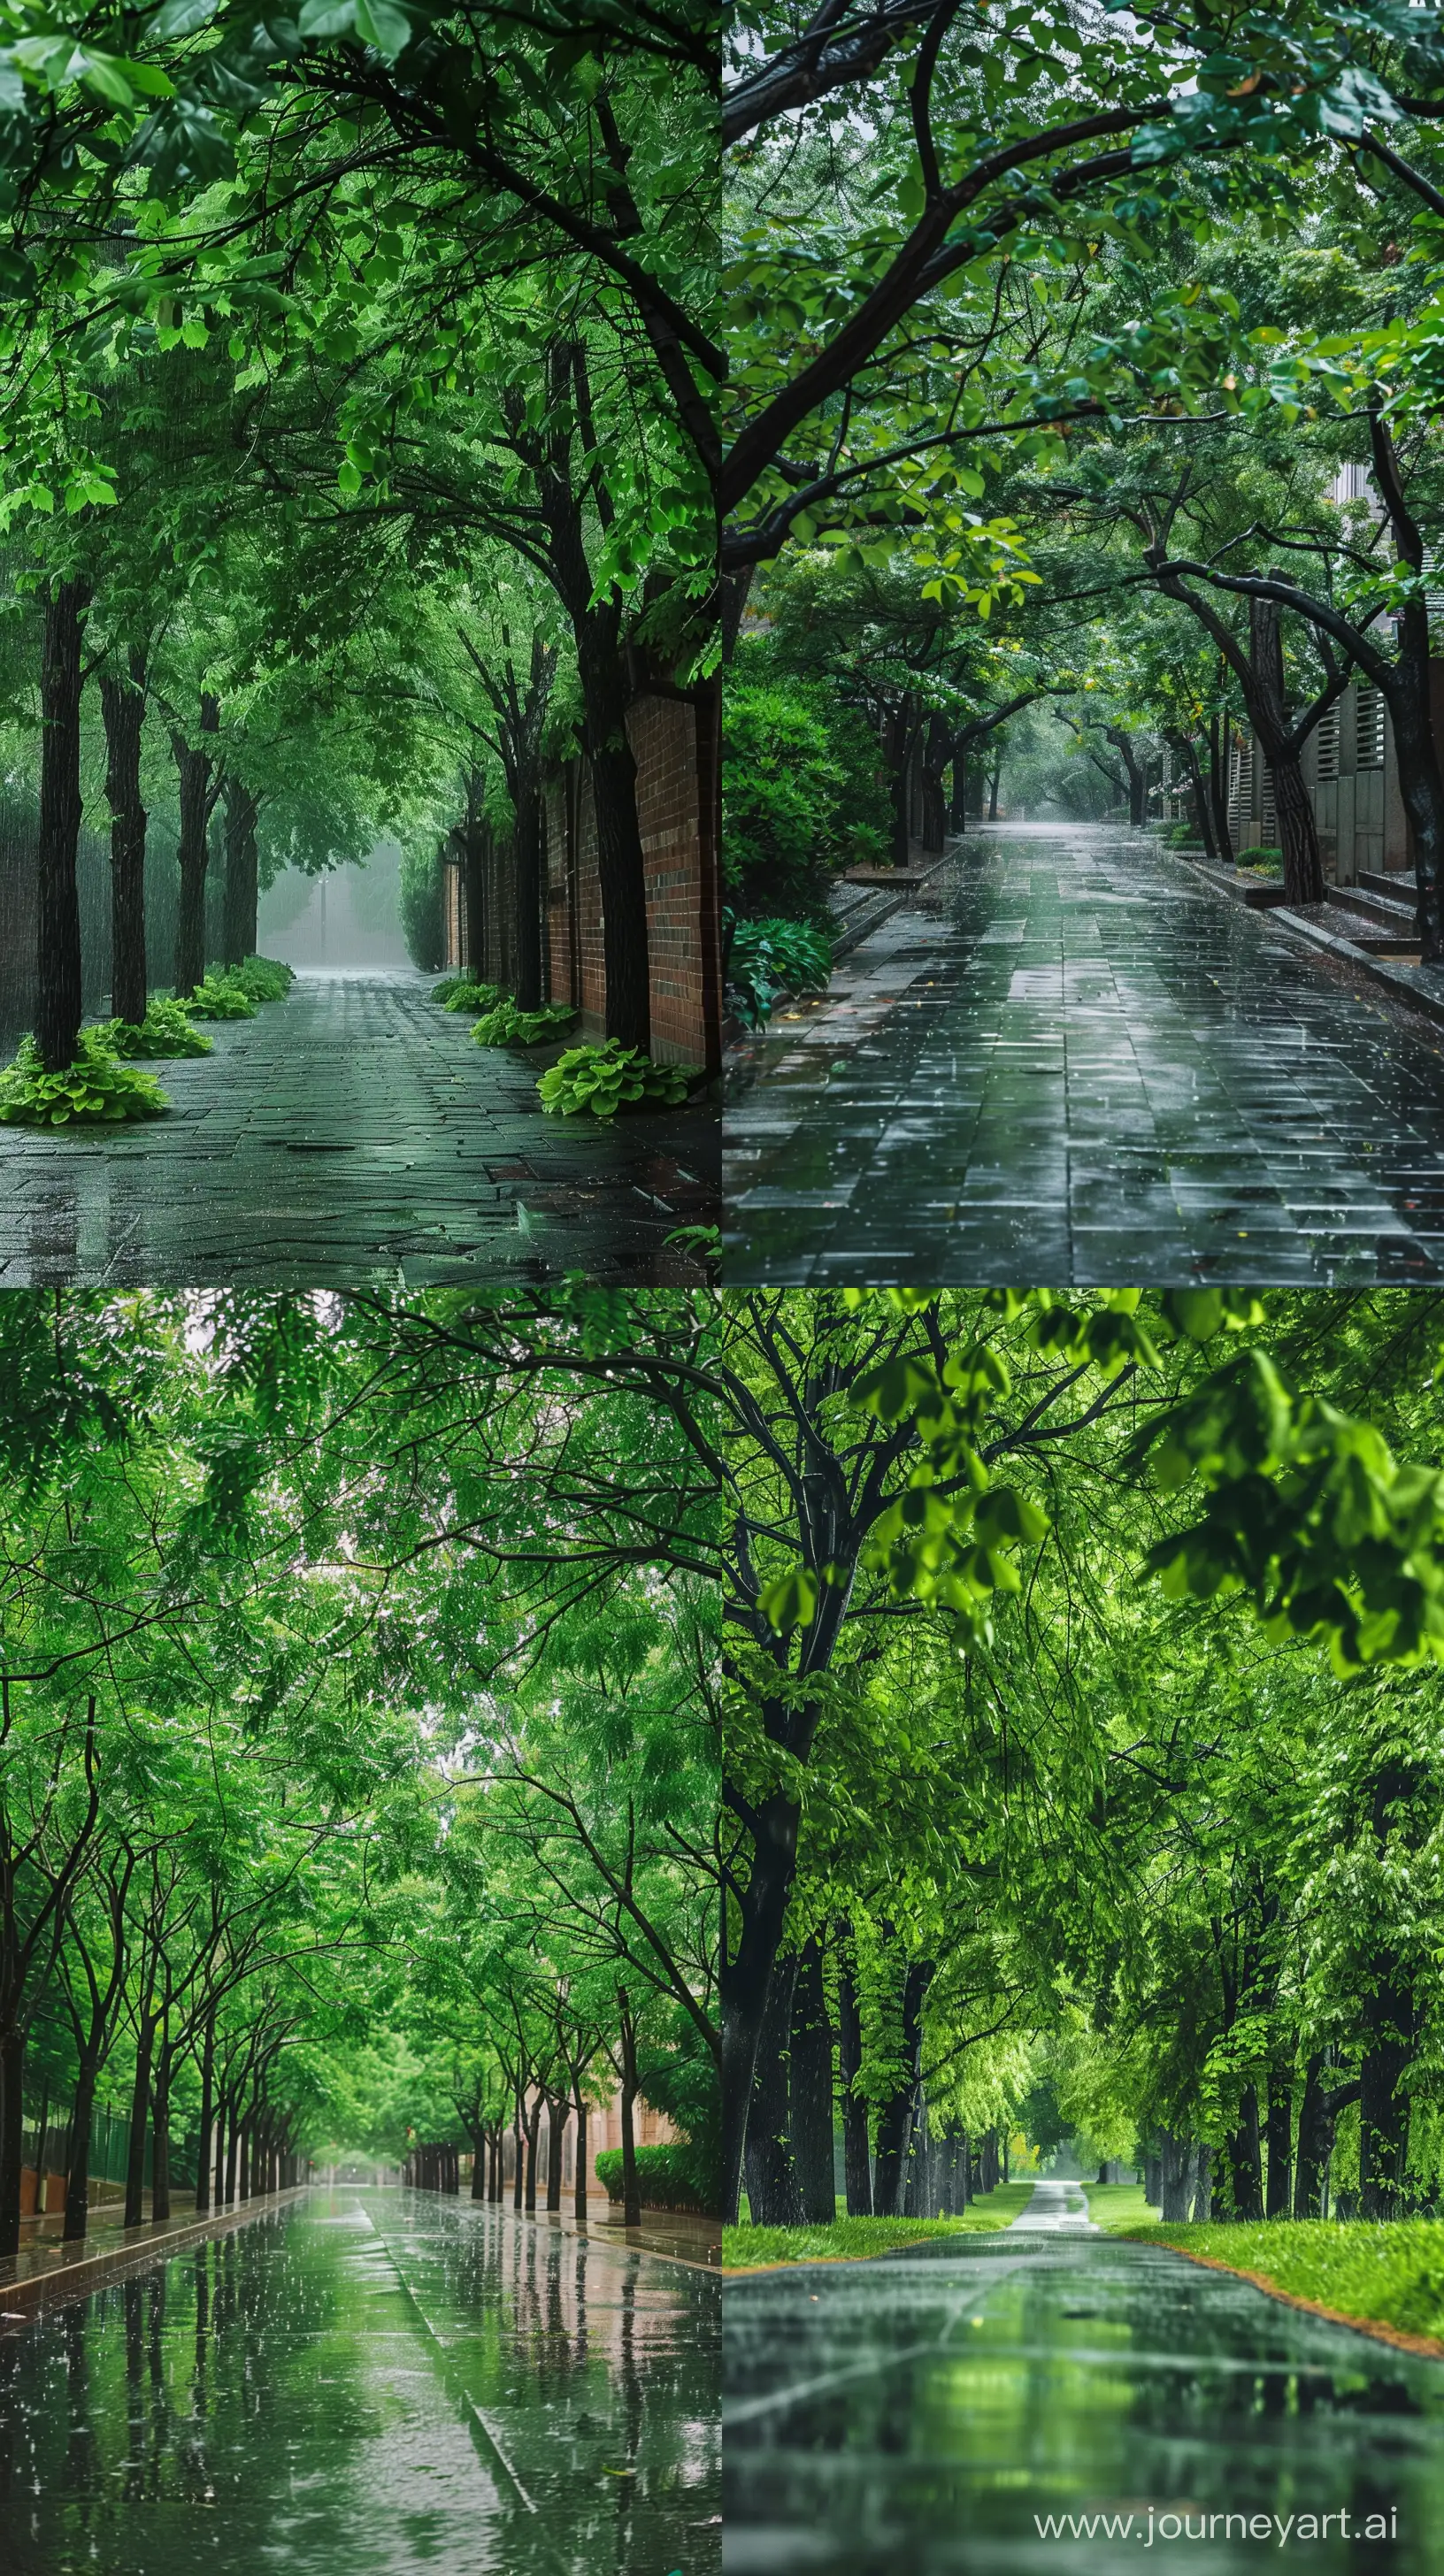 Dreamy-Rainy-Day-Photography-USA-Alley-with-Green-Trees